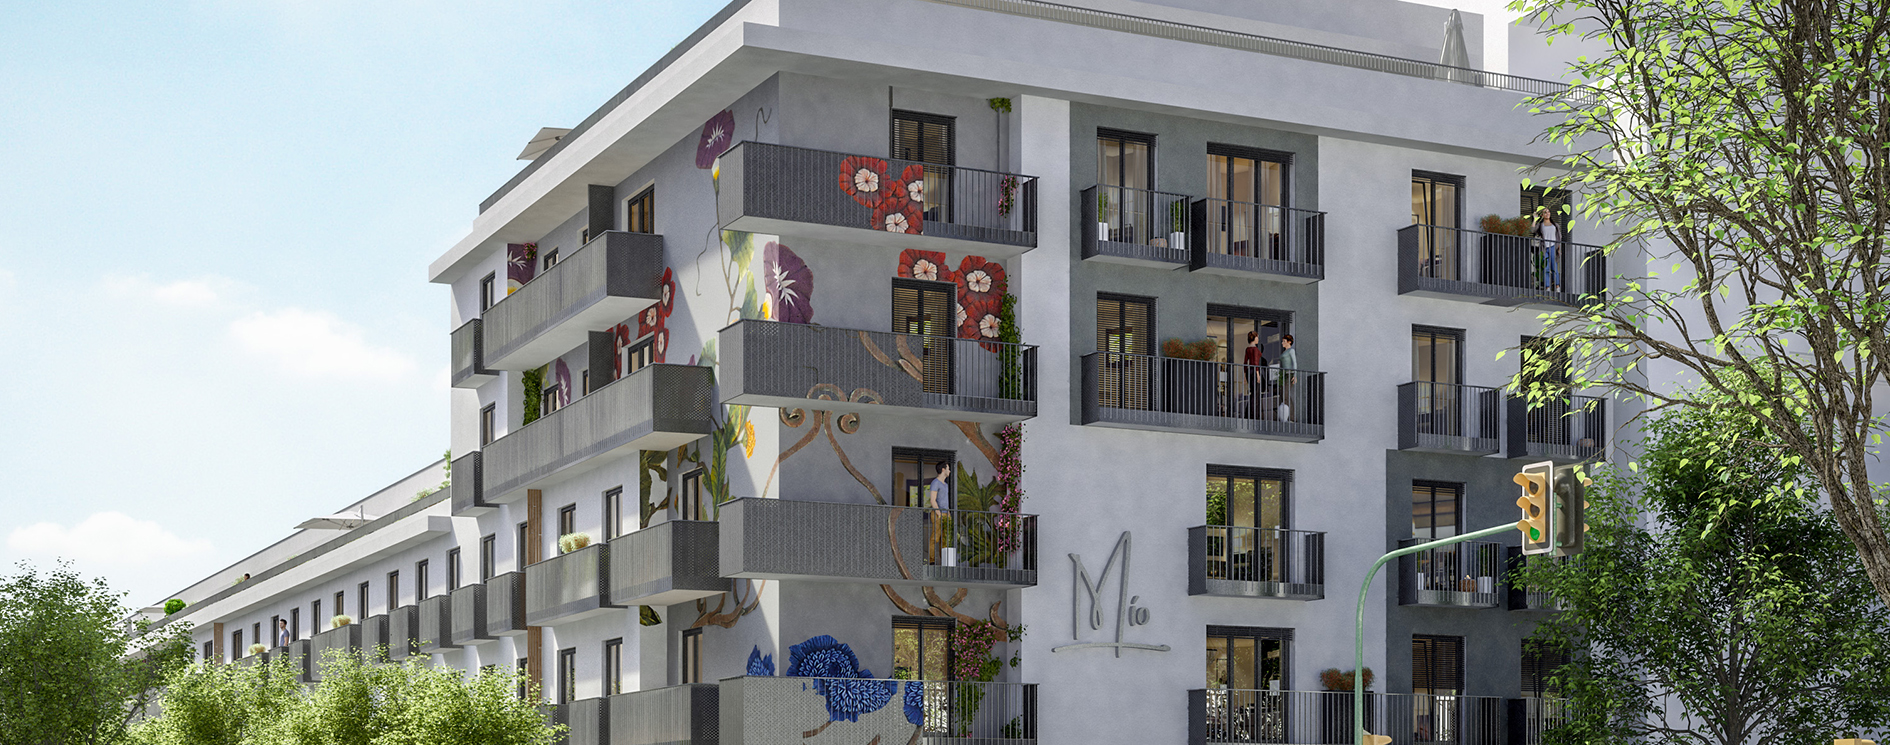 Investing in the future of living: New construction project MÍO with micro flats for global purchase in Palma de Mallorca